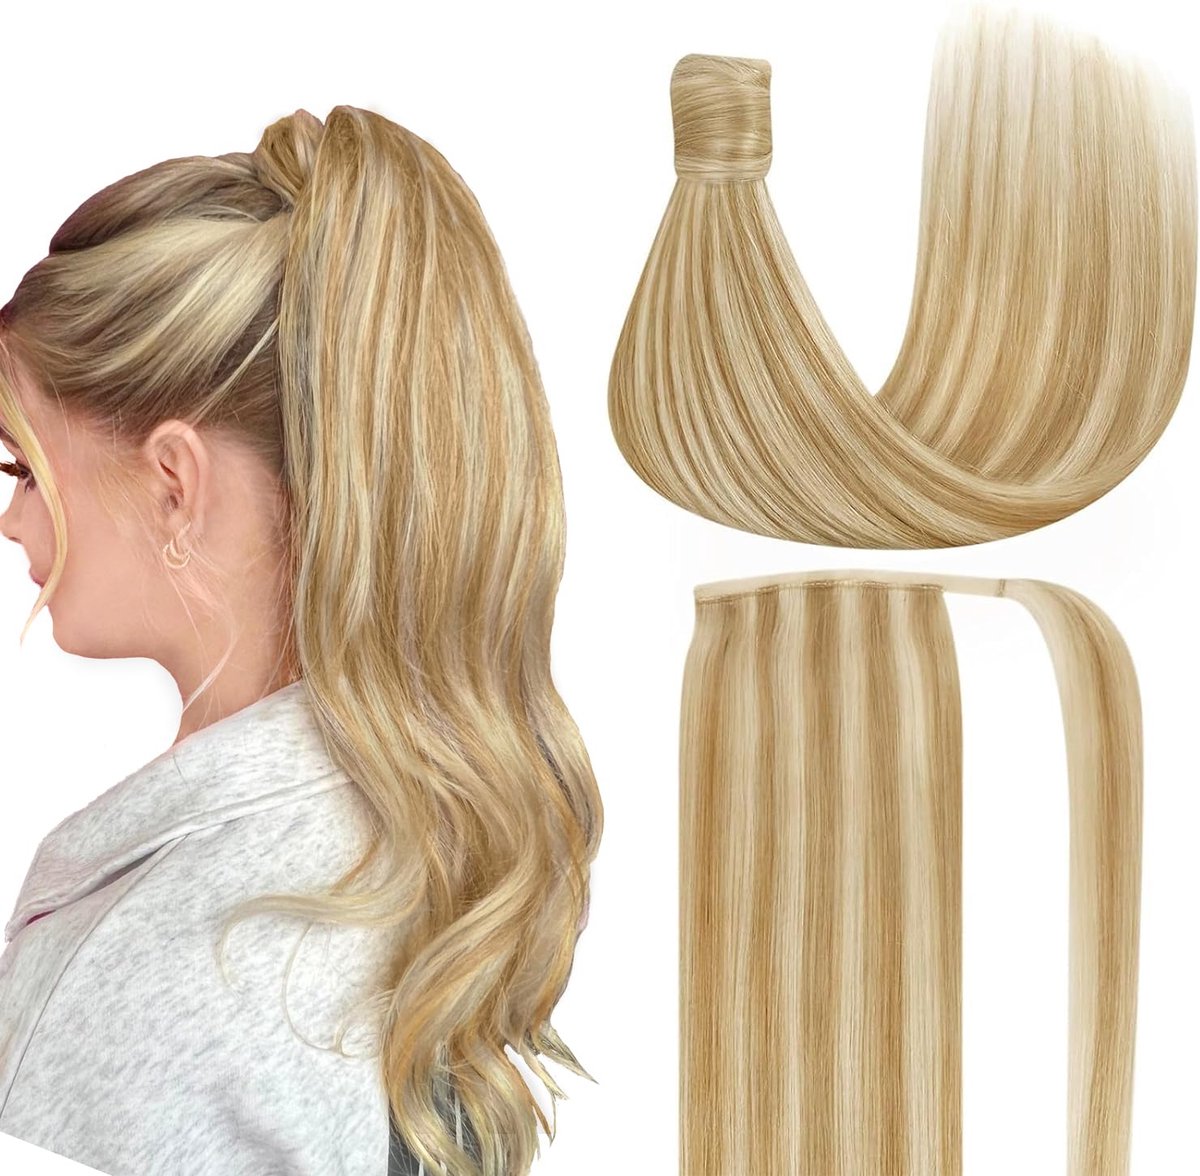 Vivendi Ponytail Clip In Hairextensions| Human Hair Echt Haar | Wrap Around Hairextensions | 22